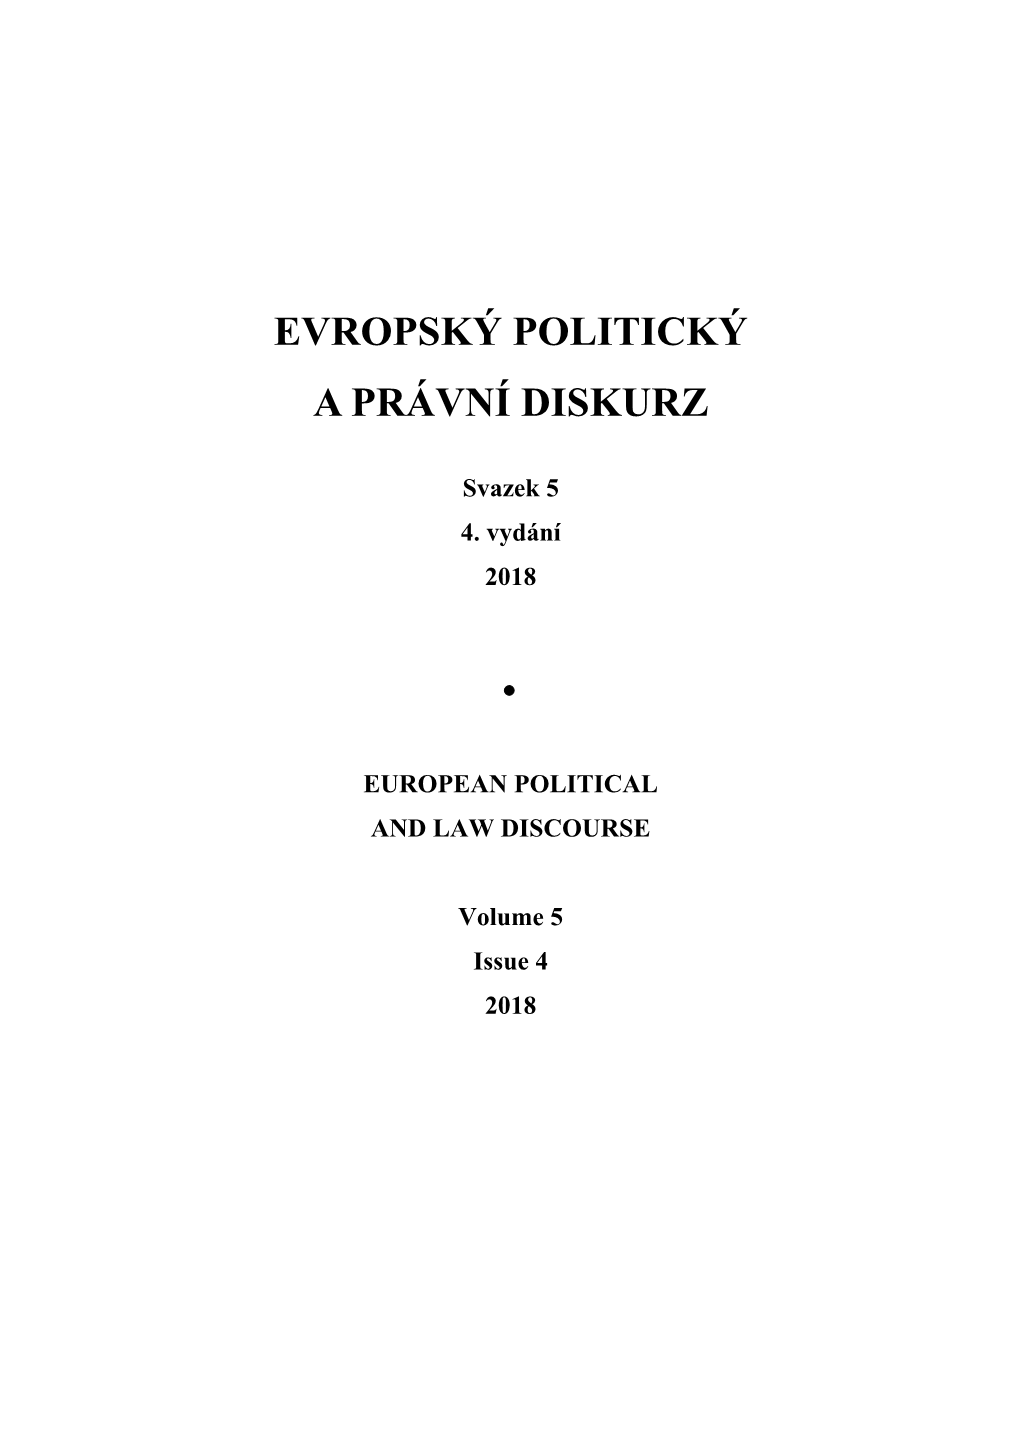 Political and Law Discourse, 2018, Volume 5, Issue 4